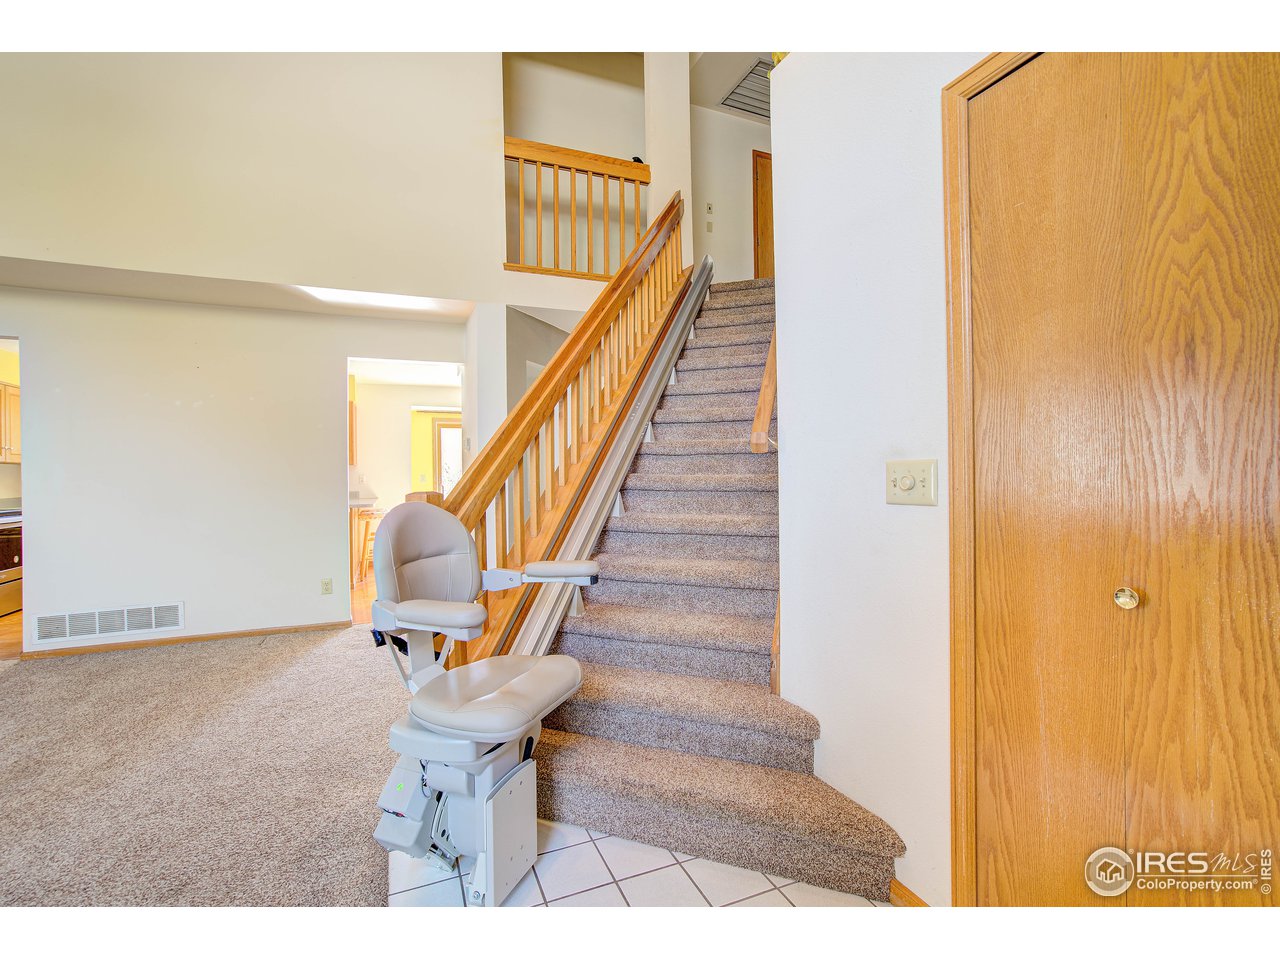 Handicap stair lift makes it a great choice for anyone that needs assistance up to the 2nd story or seller will remove. 